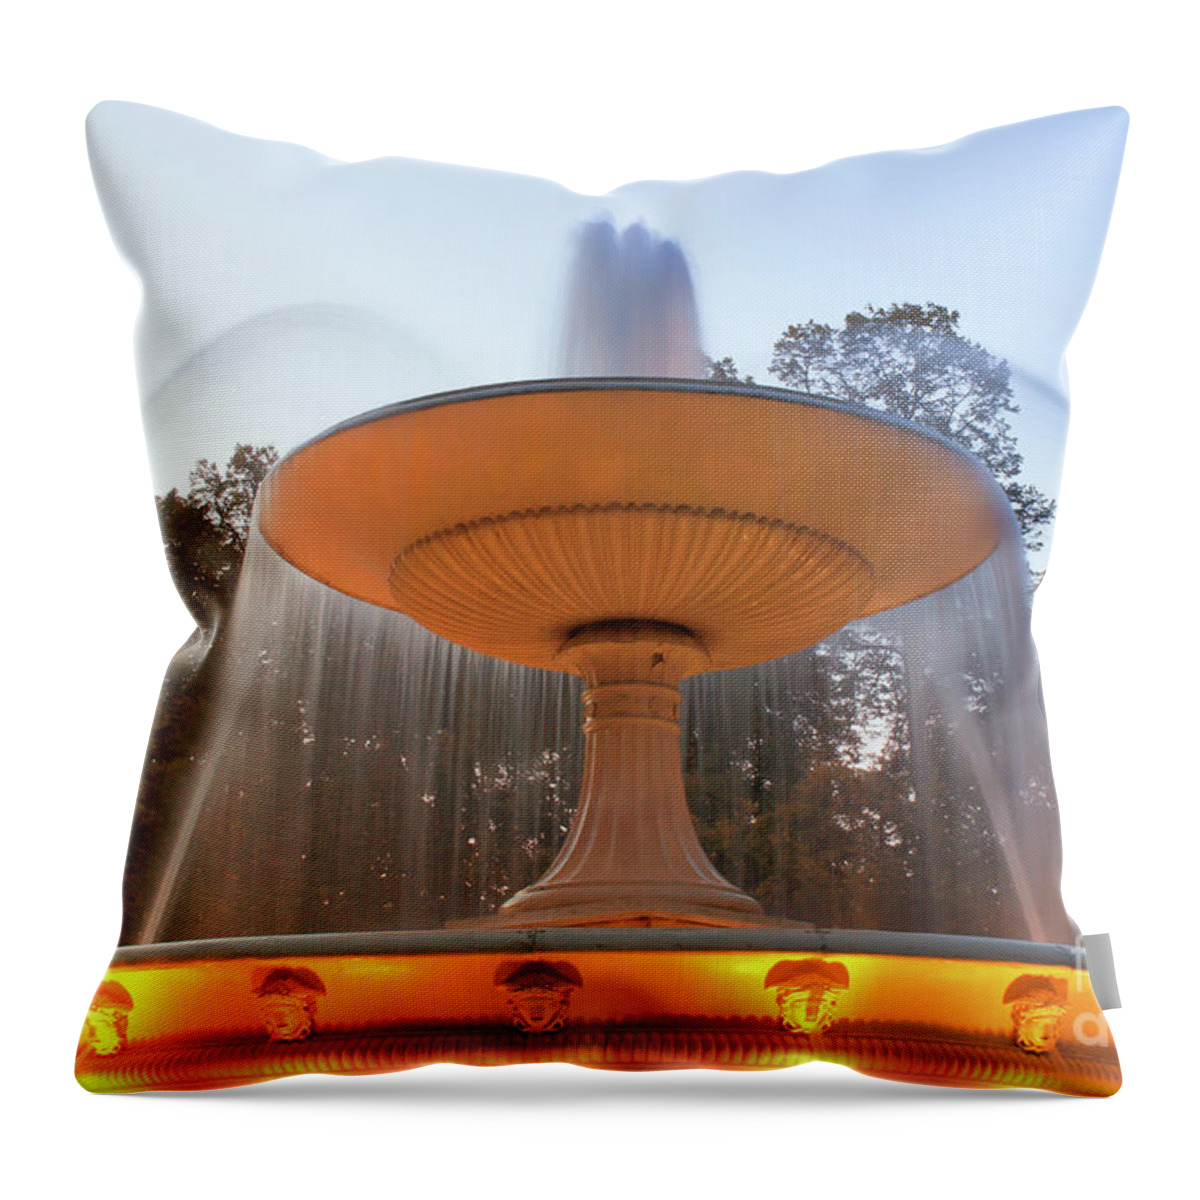 H2o Throw Pillow featuring the photograph Pilsudski Sqaure Fountain by Tom Gowanlock